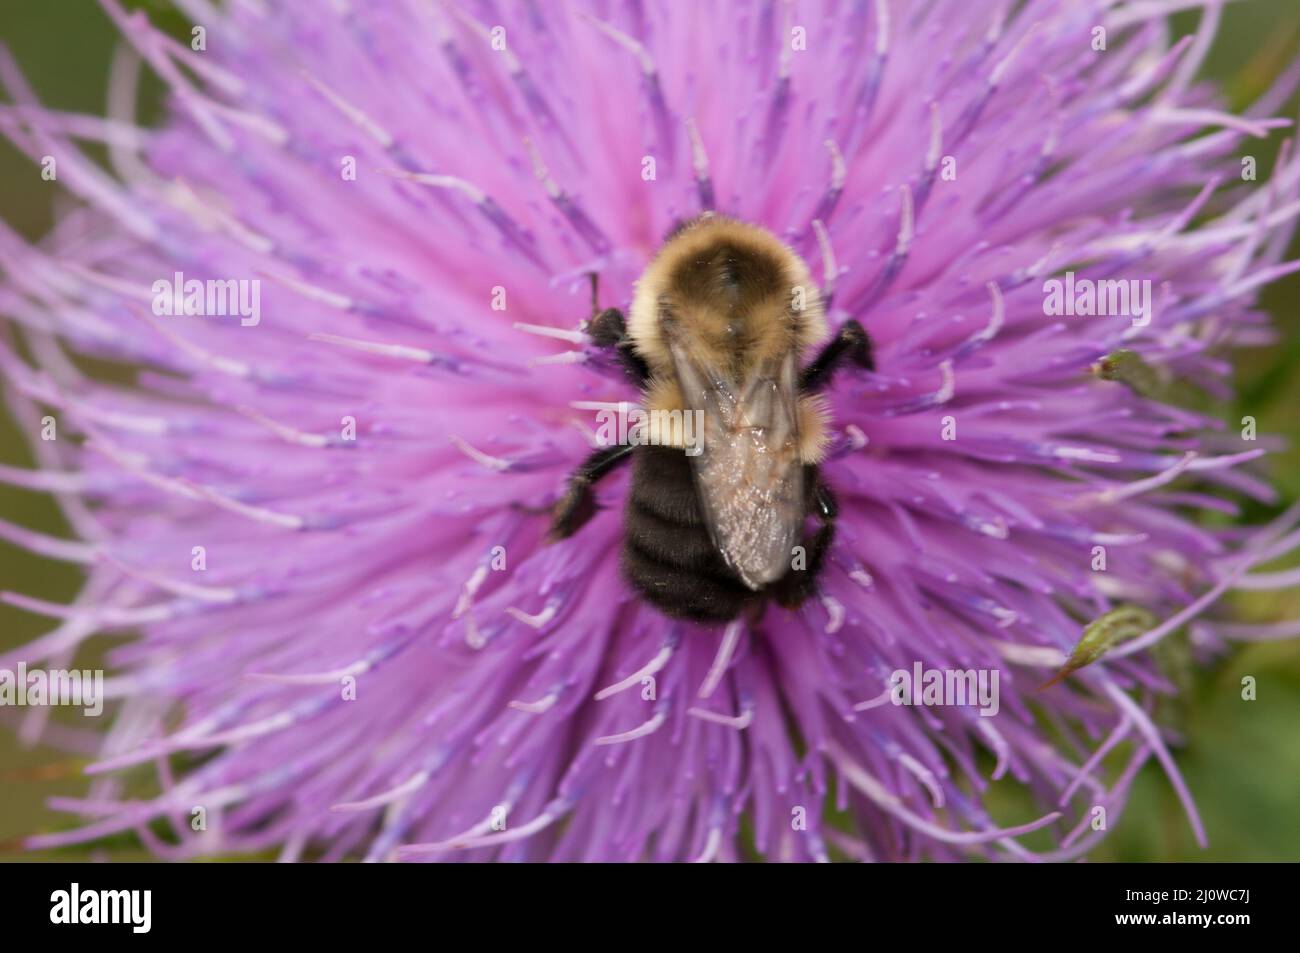 Bumblebee on thistle flower in Shenandoah National Park. Stock Photo